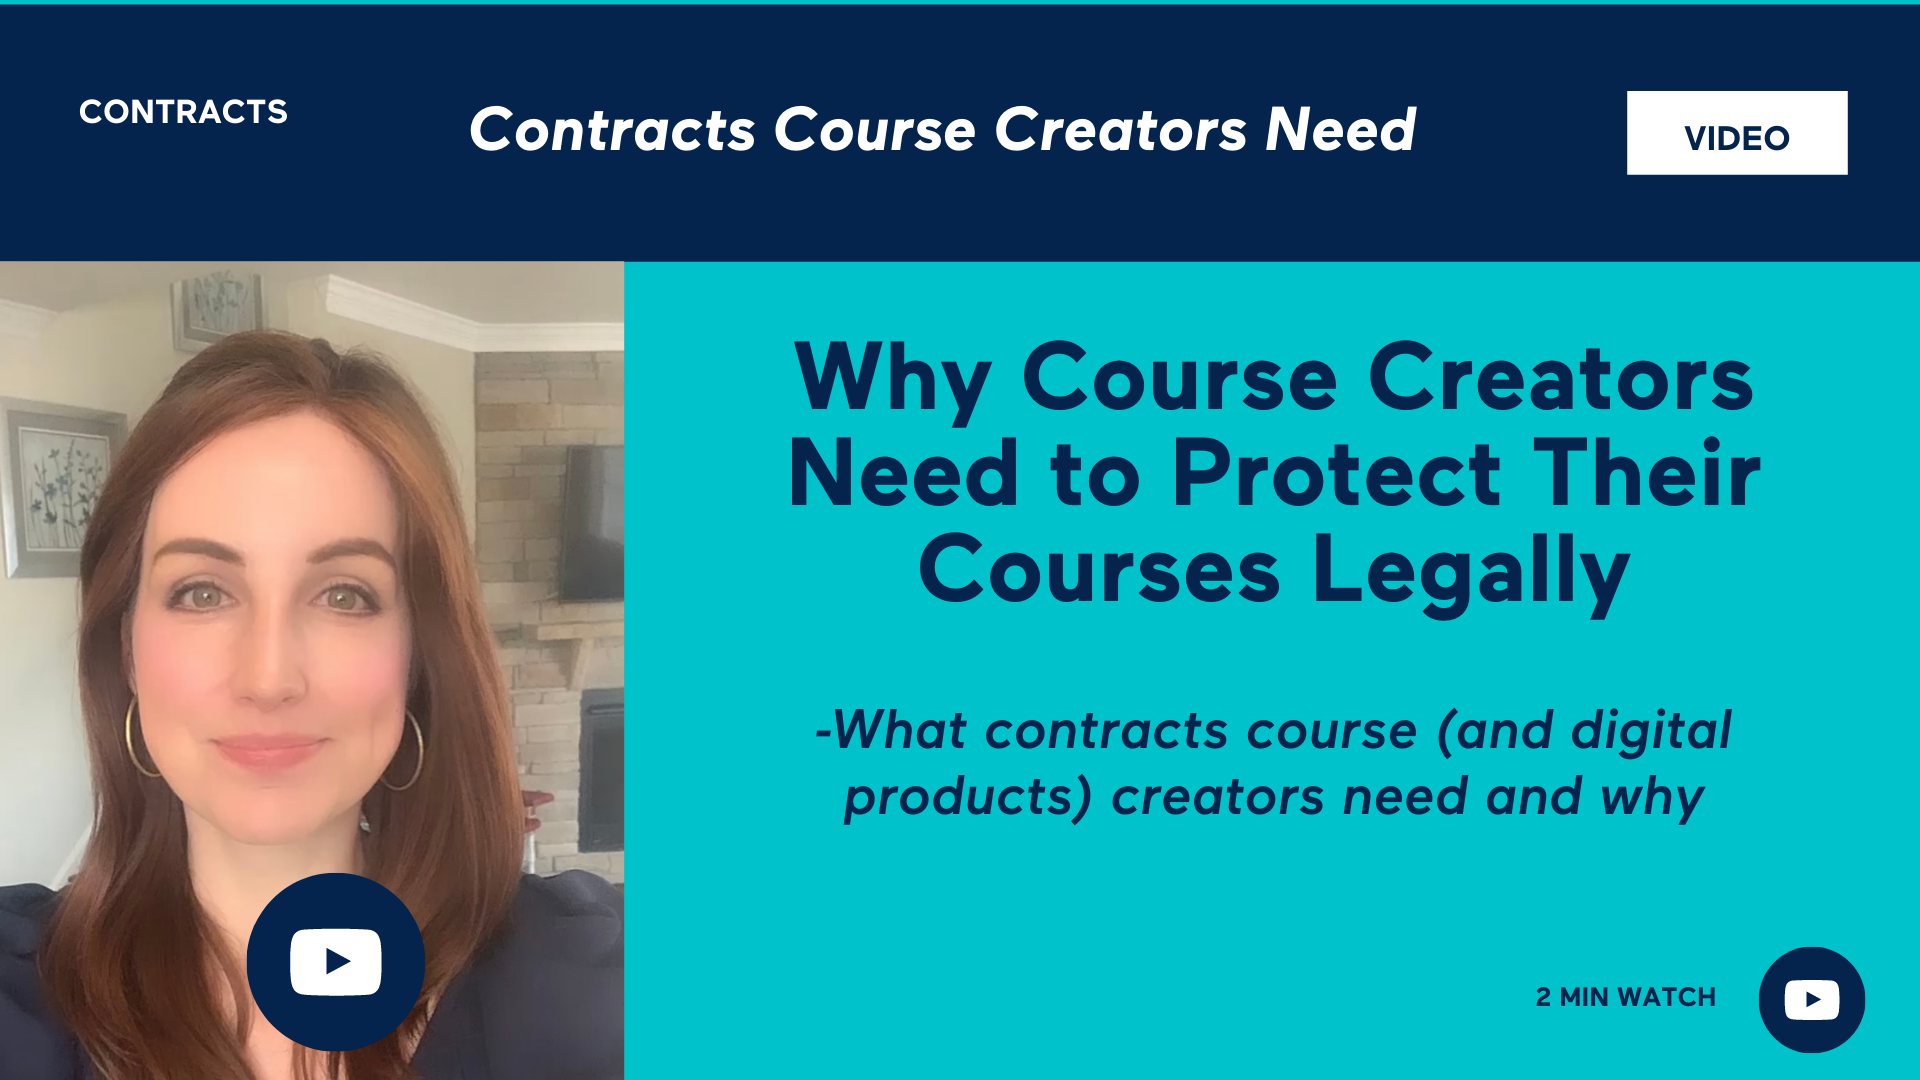 Contracts Course Creators Need